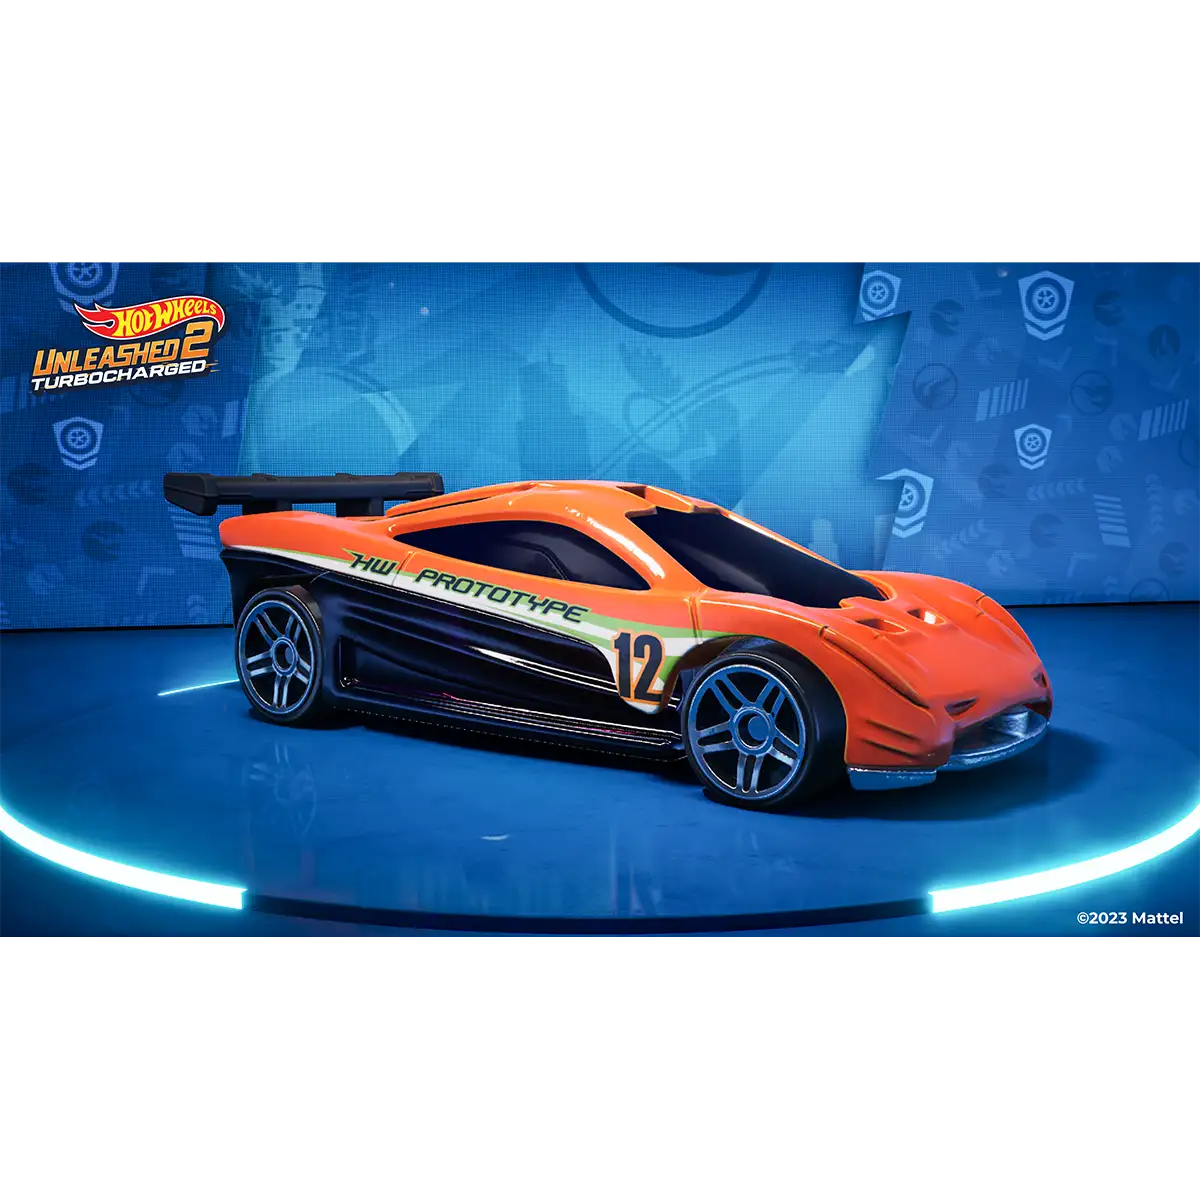 Hot Wheels Unleashed™ 2 Turbocharged Pure Fire Edition (PS5) Image 6